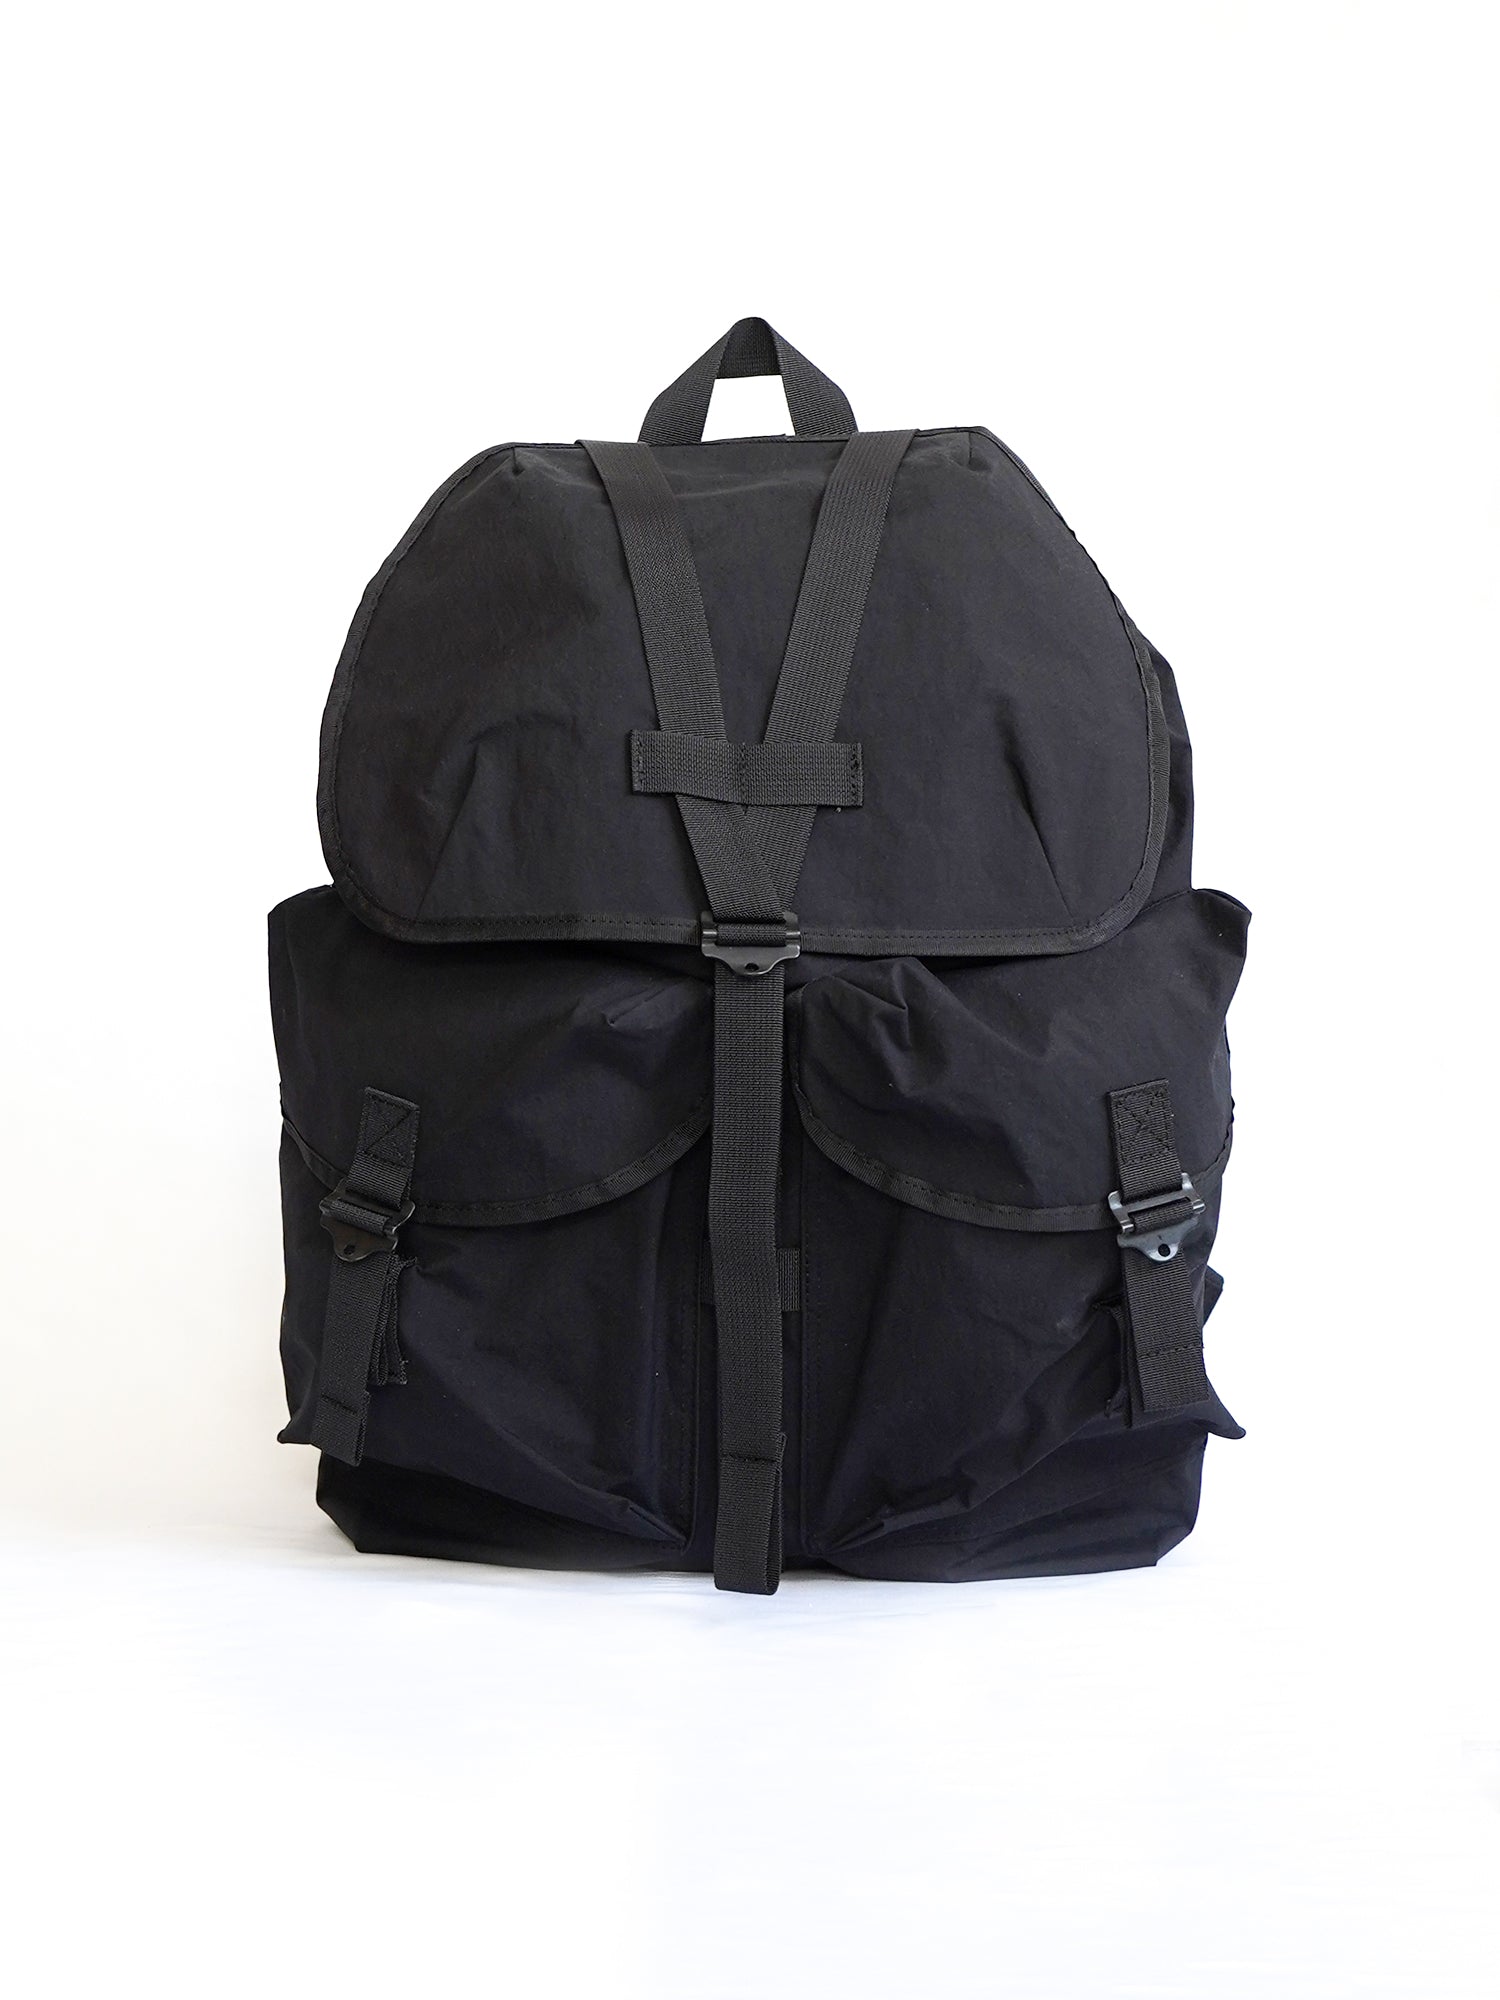 ENDS AND MEANS Evacuation Backpack 24SSMadeinJapan